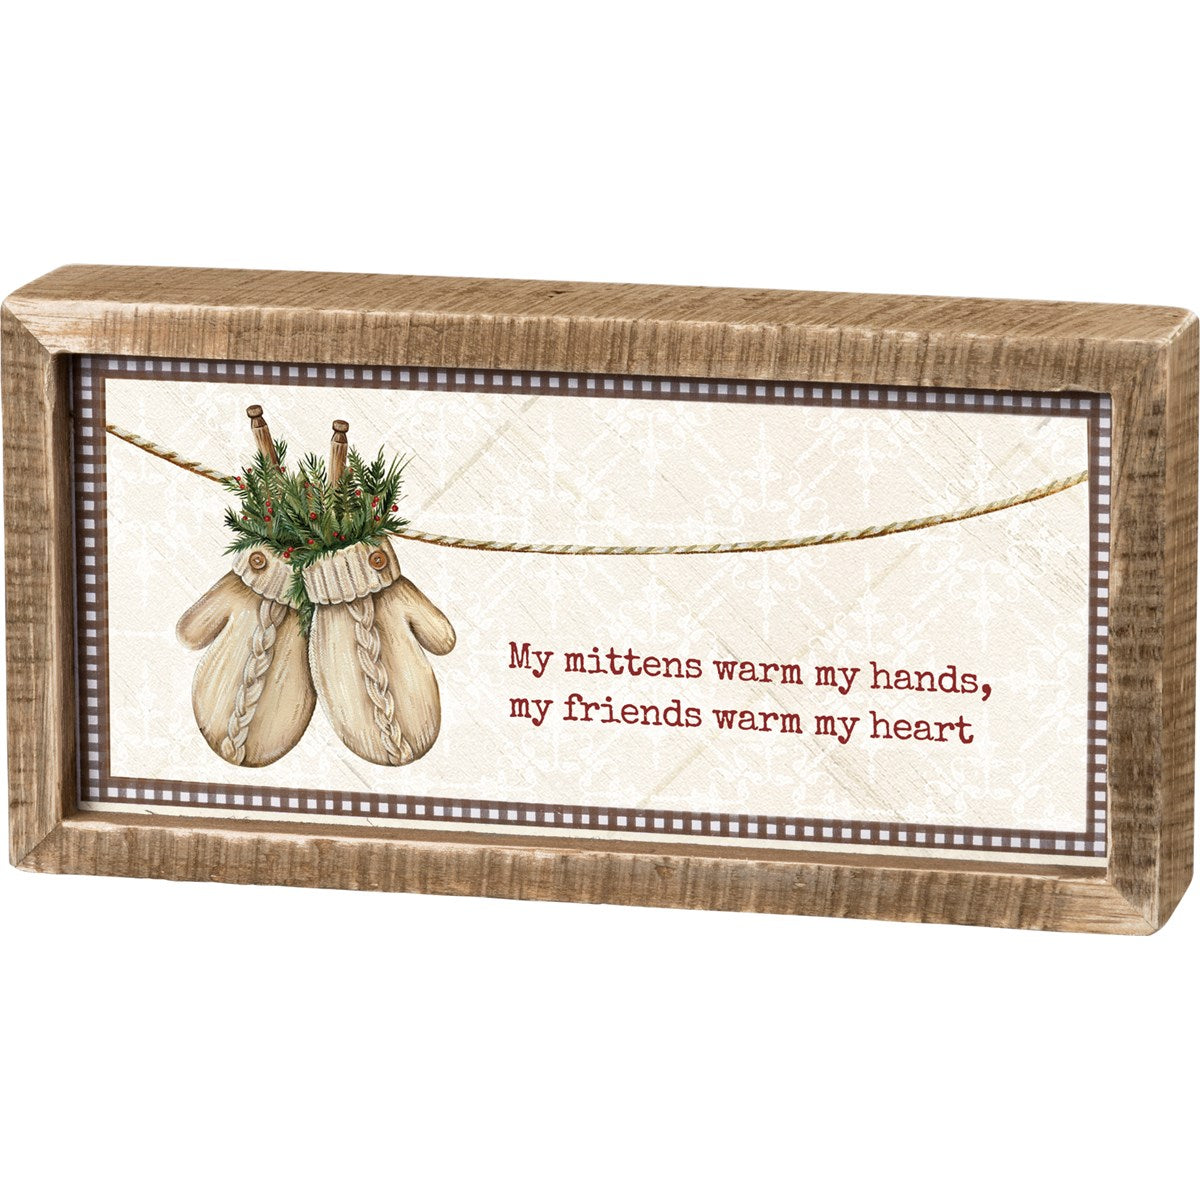 Mittens warm my hands, my friends warm my heart inset box sign measuring 10 inches x 5 inches x 1.75 inches. Made from wood and paper.